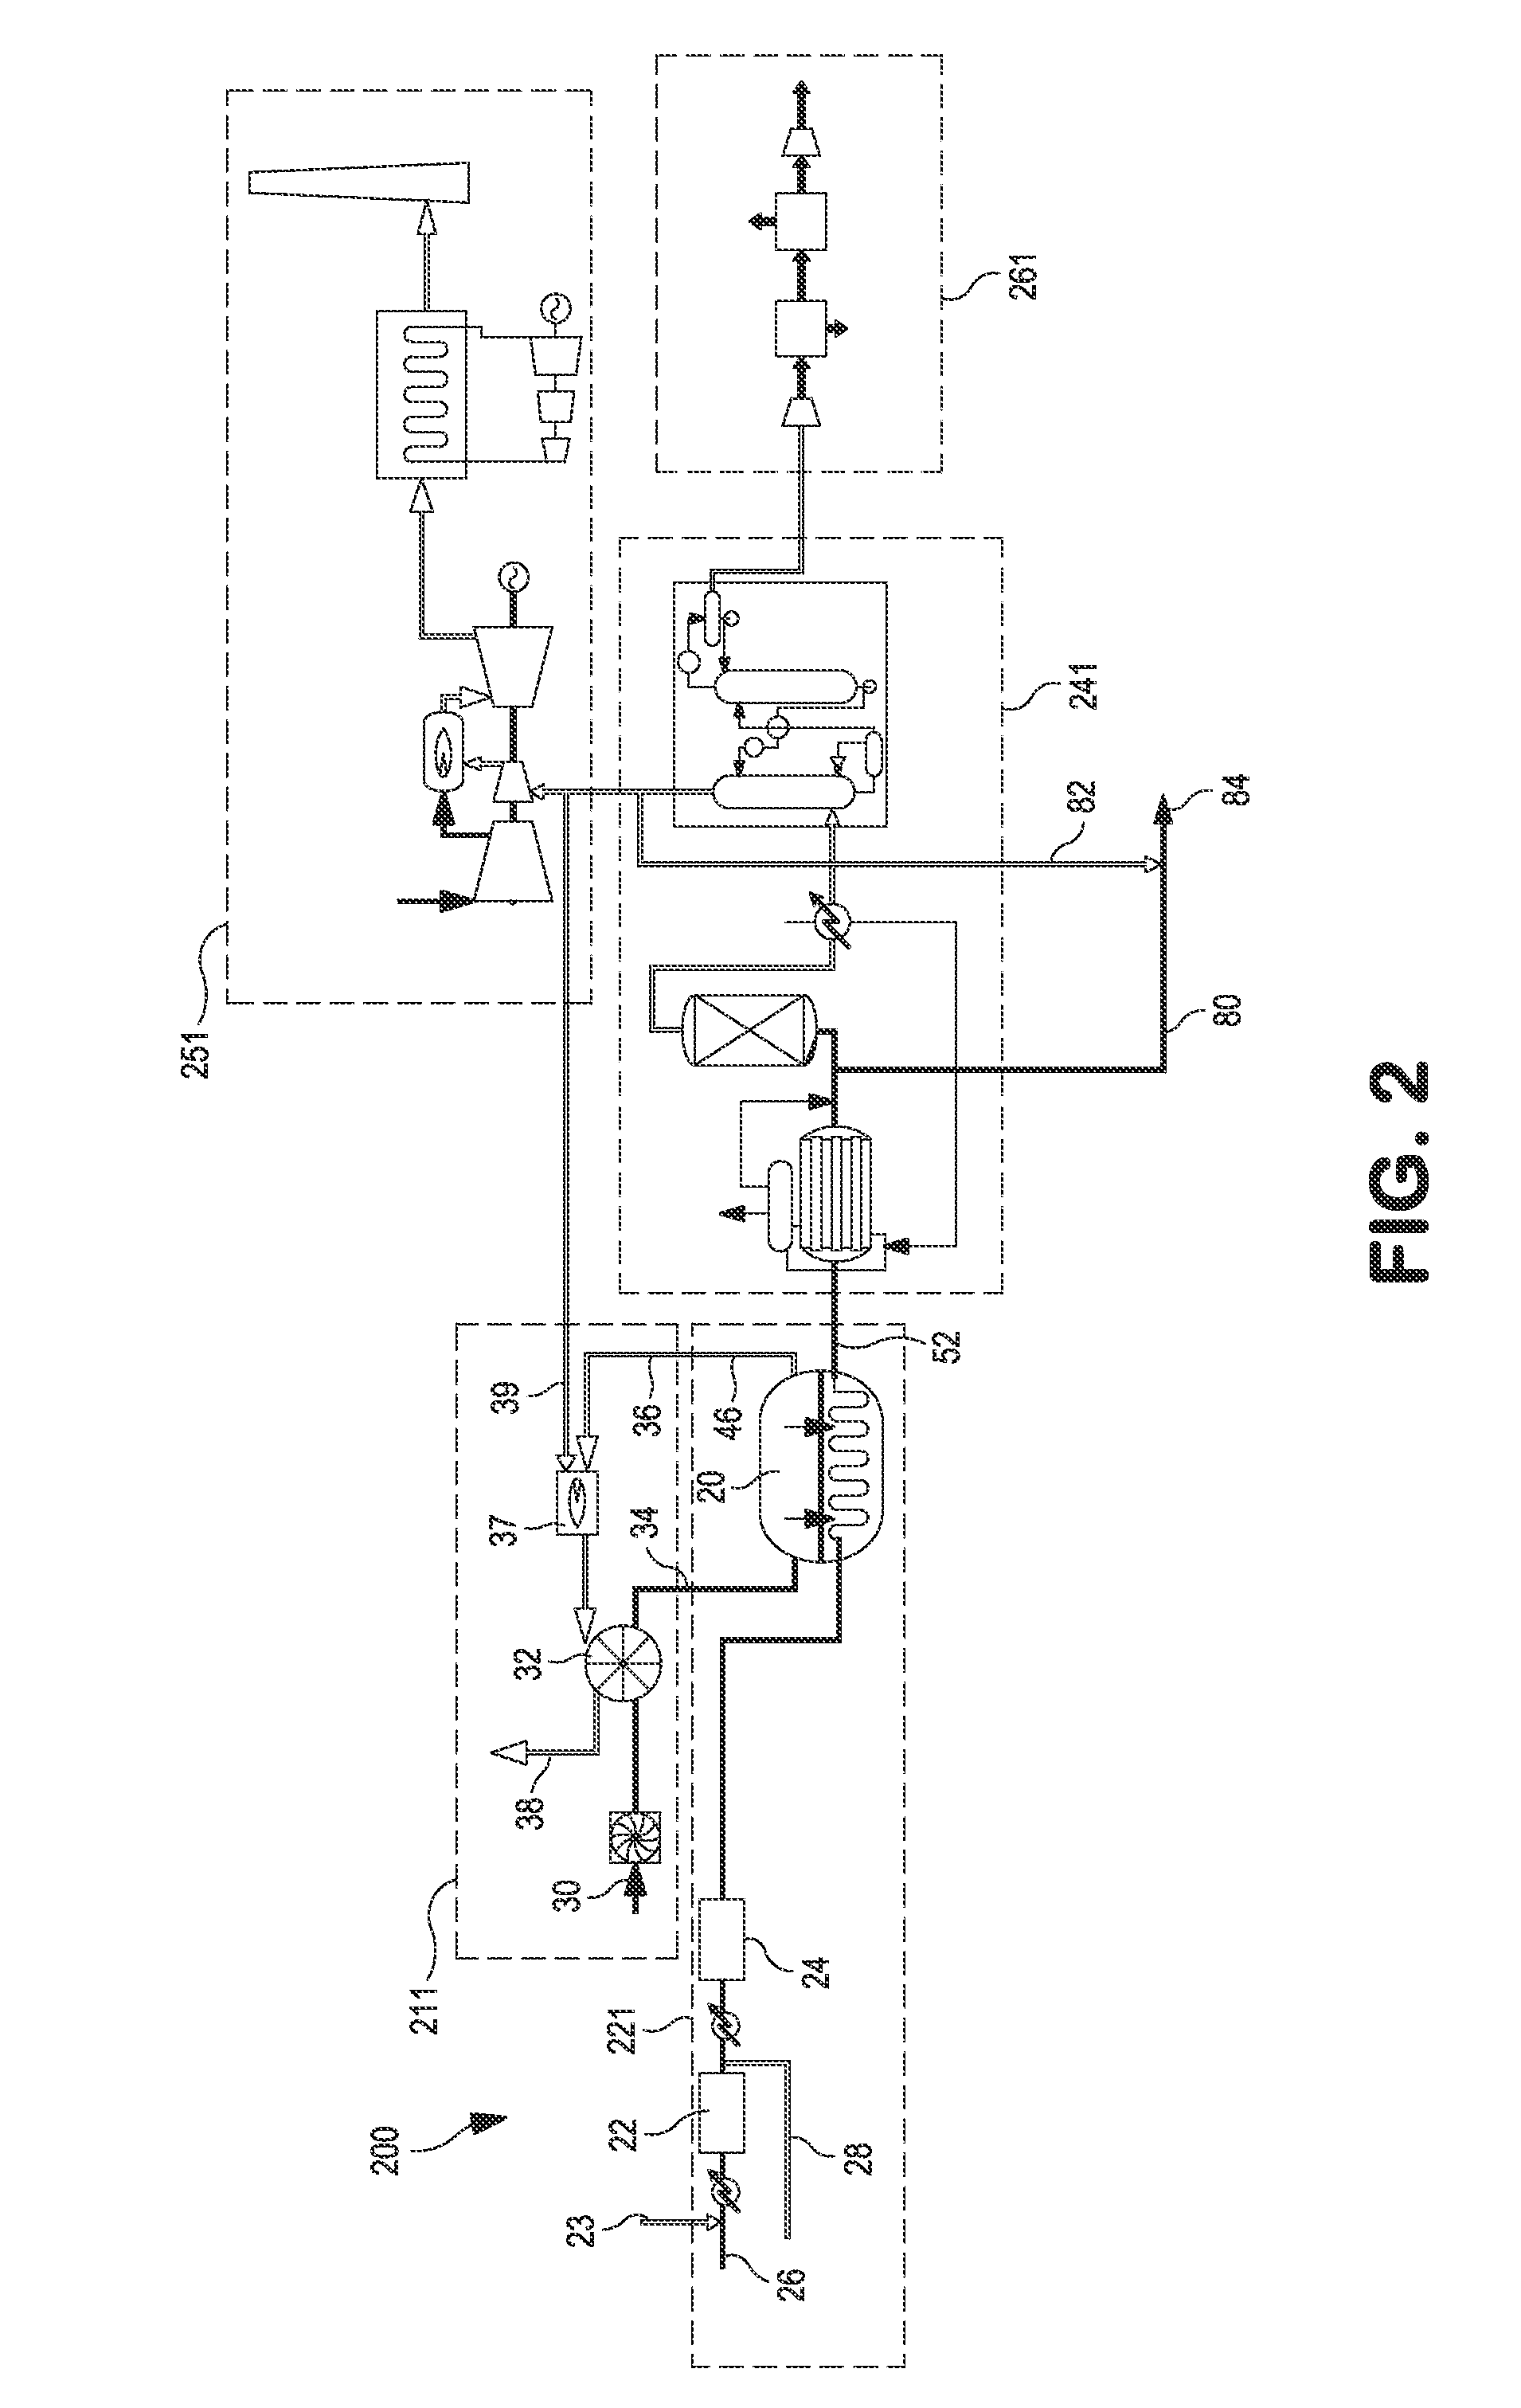 Oxygen transport membrane reactor based method and system for generating electric power